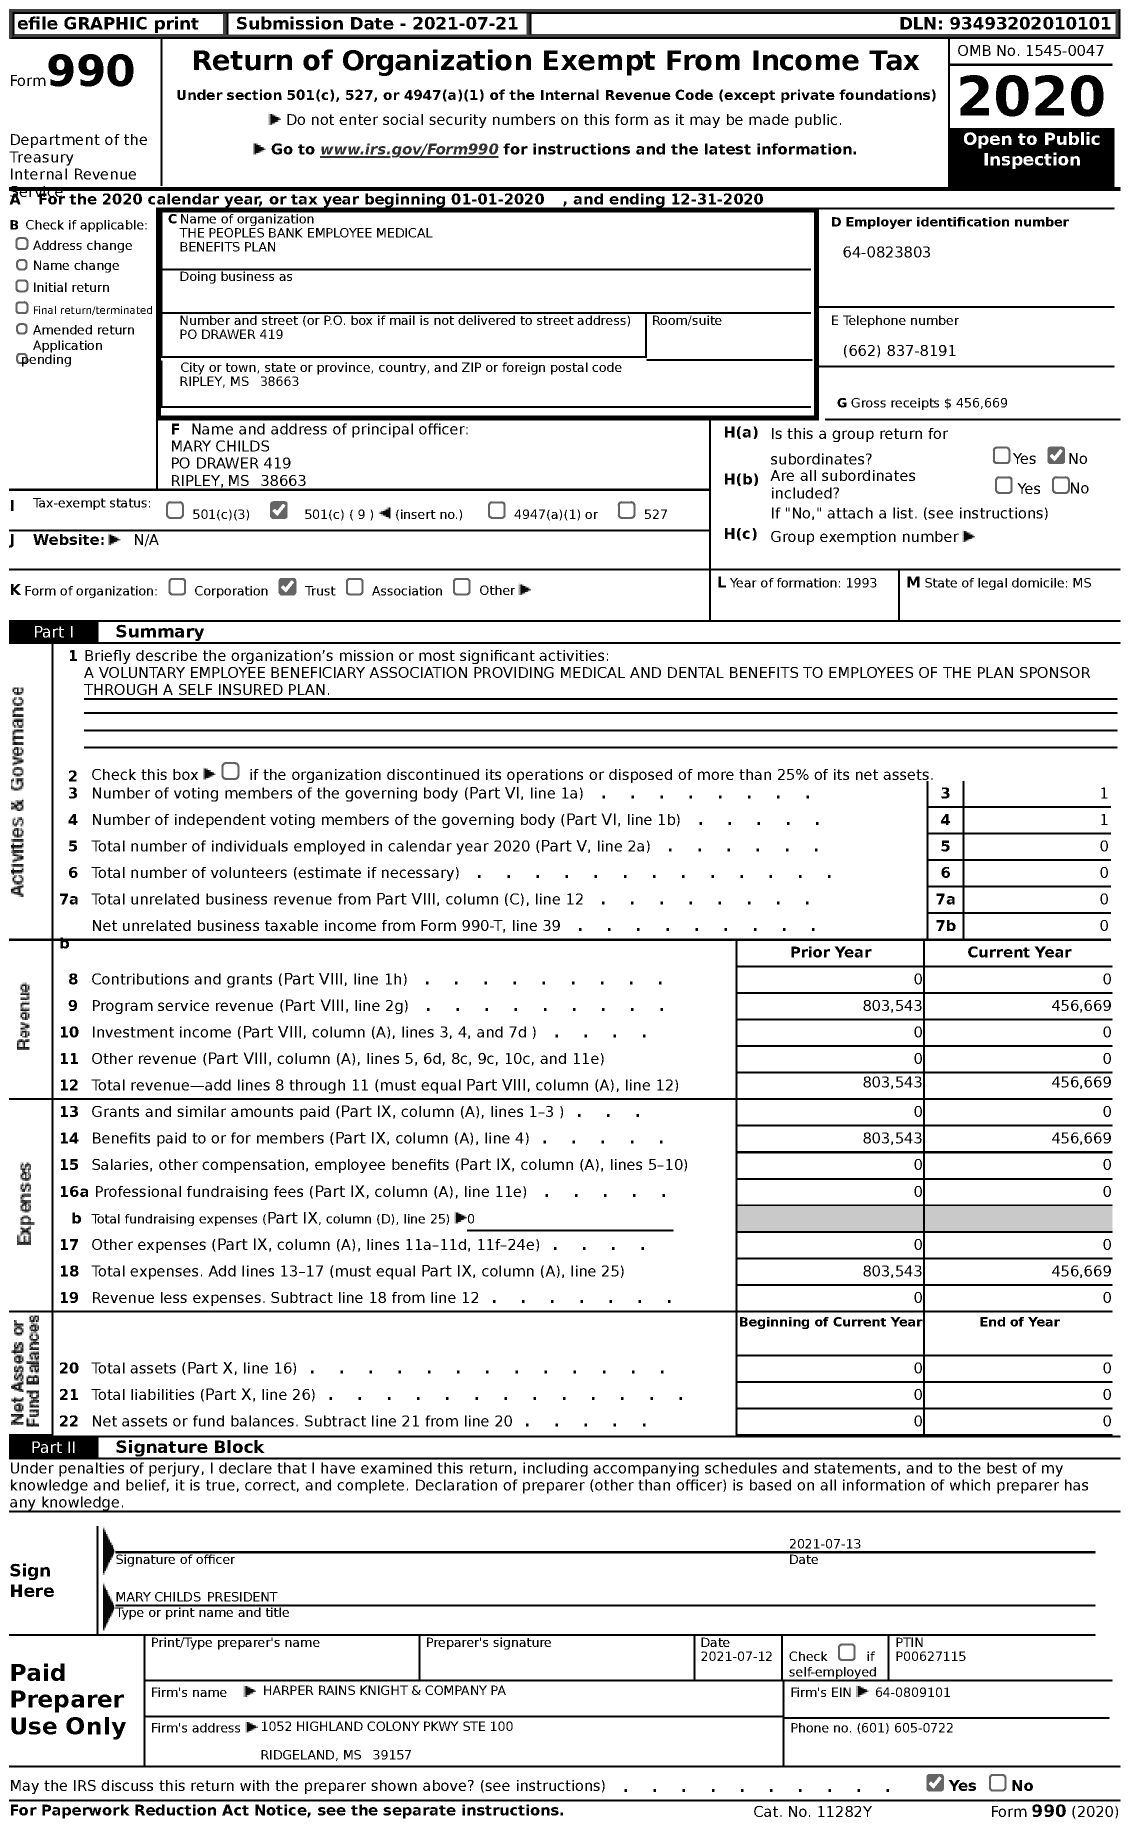 Image of first page of 2020 Form 990 for The Peoples Bank Employee Medical Benefits Plan